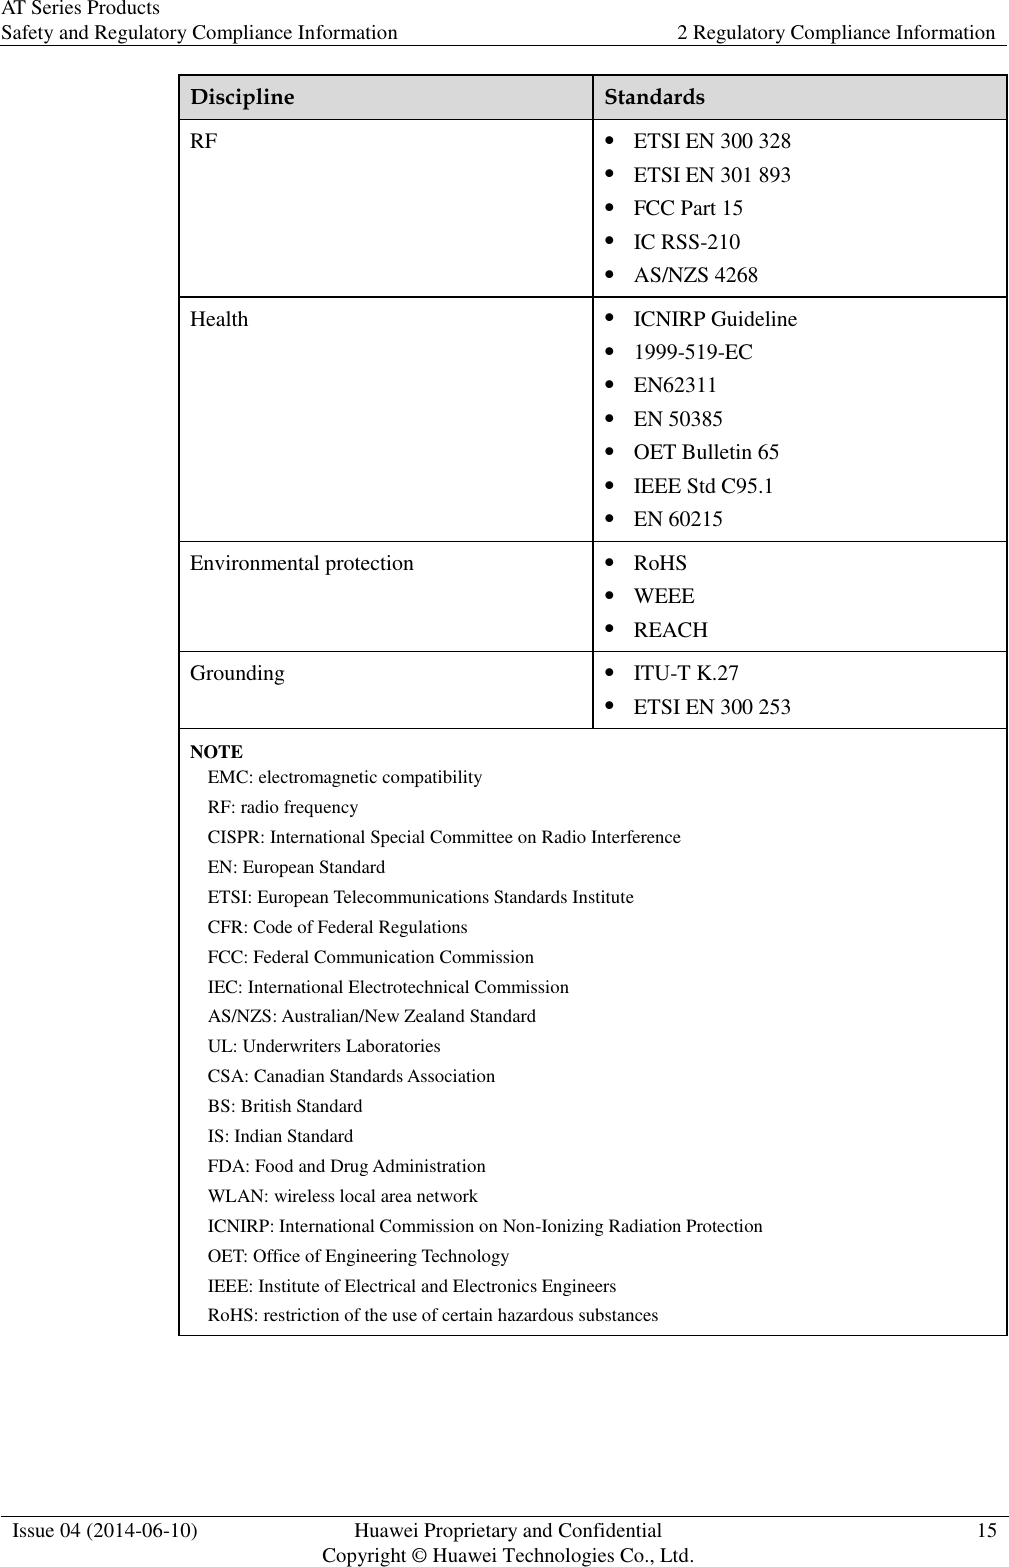 AT Series Products Safety and Regulatory Compliance Information 2 Regulatory Compliance Information  Issue 04 (2014-06-10) Huawei Proprietary and Confidential           Copyright © Huawei Technologies Co., Ltd. 15  Discipline Standards RF  ETSI EN 300 328   ETSI EN 301 893   FCC Part 15  IC RSS-210  AS/NZS 4268 Health  ICNIRP Guideline  1999-519-EC  EN62311  EN 50385  OET Bulletin 65  IEEE Std C95.1  EN 60215 Environmental protection  RoHS  WEEE  REACH Grounding  ITU-T K.27  ETSI EN 300 253 NOTE EMC: electromagnetic compatibility RF: radio frequency CISPR: International Special Committee on Radio Interference EN: European Standard ETSI: European Telecommunications Standards Institute CFR: Code of Federal Regulations FCC: Federal Communication Commission IEC: International Electrotechnical Commission AS/NZS: Australian/New Zealand Standard UL: Underwriters Laboratories CSA: Canadian Standards Association BS: British Standard IS: Indian Standard FDA: Food and Drug Administration WLAN: wireless local area network ICNIRP: International Commission on Non-Ionizing Radiation Protection OET: Office of Engineering Technology IEEE: Institute of Electrical and Electronics Engineers RoHS: restriction of the use of certain hazardous substances  